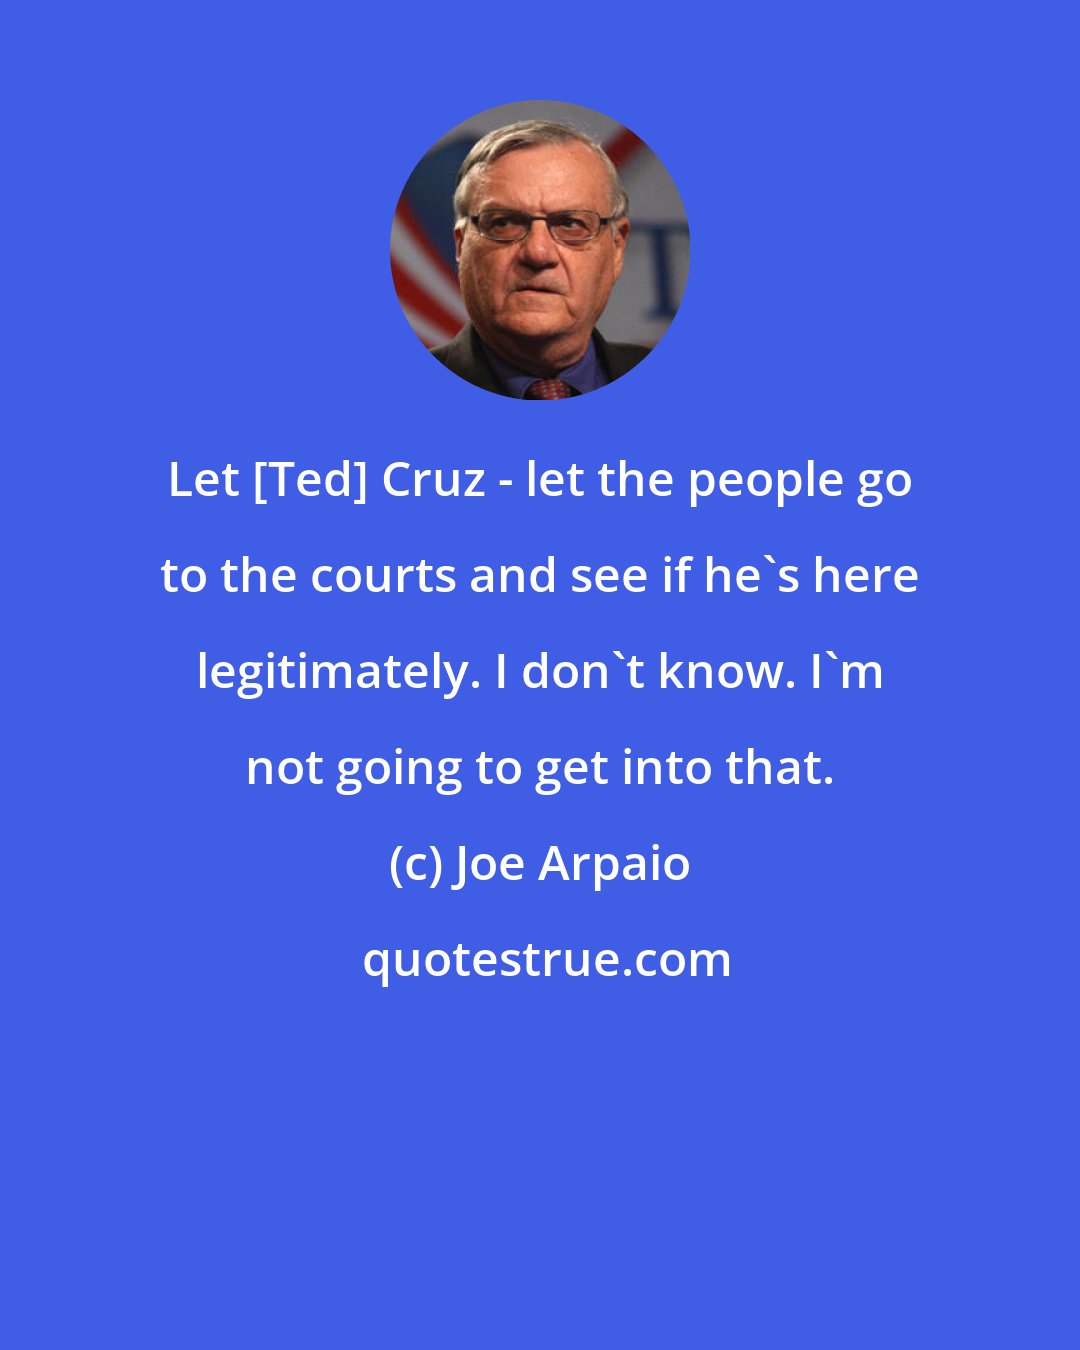 Joe Arpaio: Let [Ted] Cruz - let the people go to the courts and see if he's here legitimately. I don't know. I'm not going to get into that.